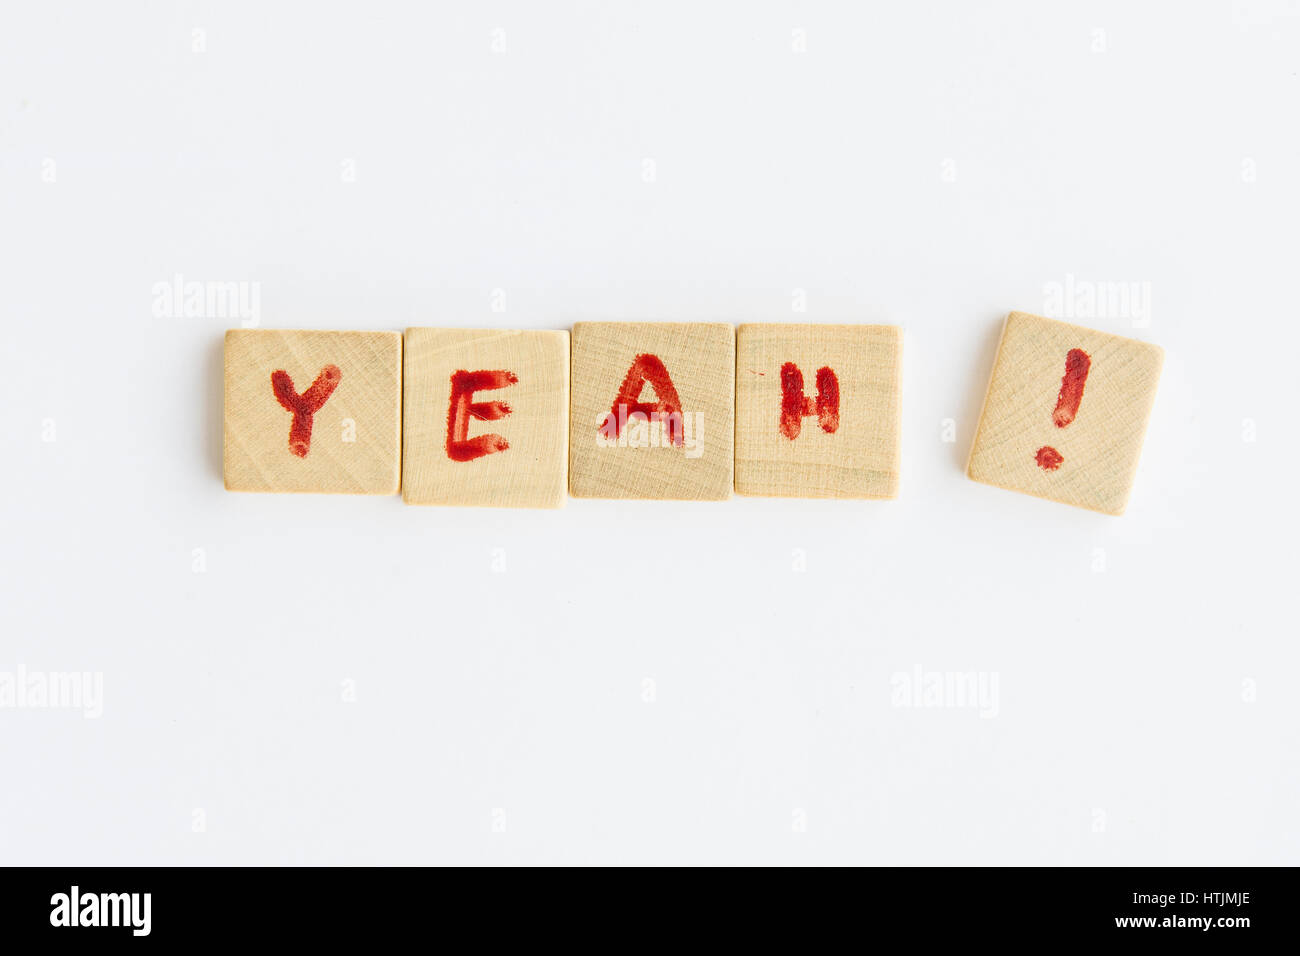 the word Yeah  formed with letters written on squares of wood dowels Stock Photo